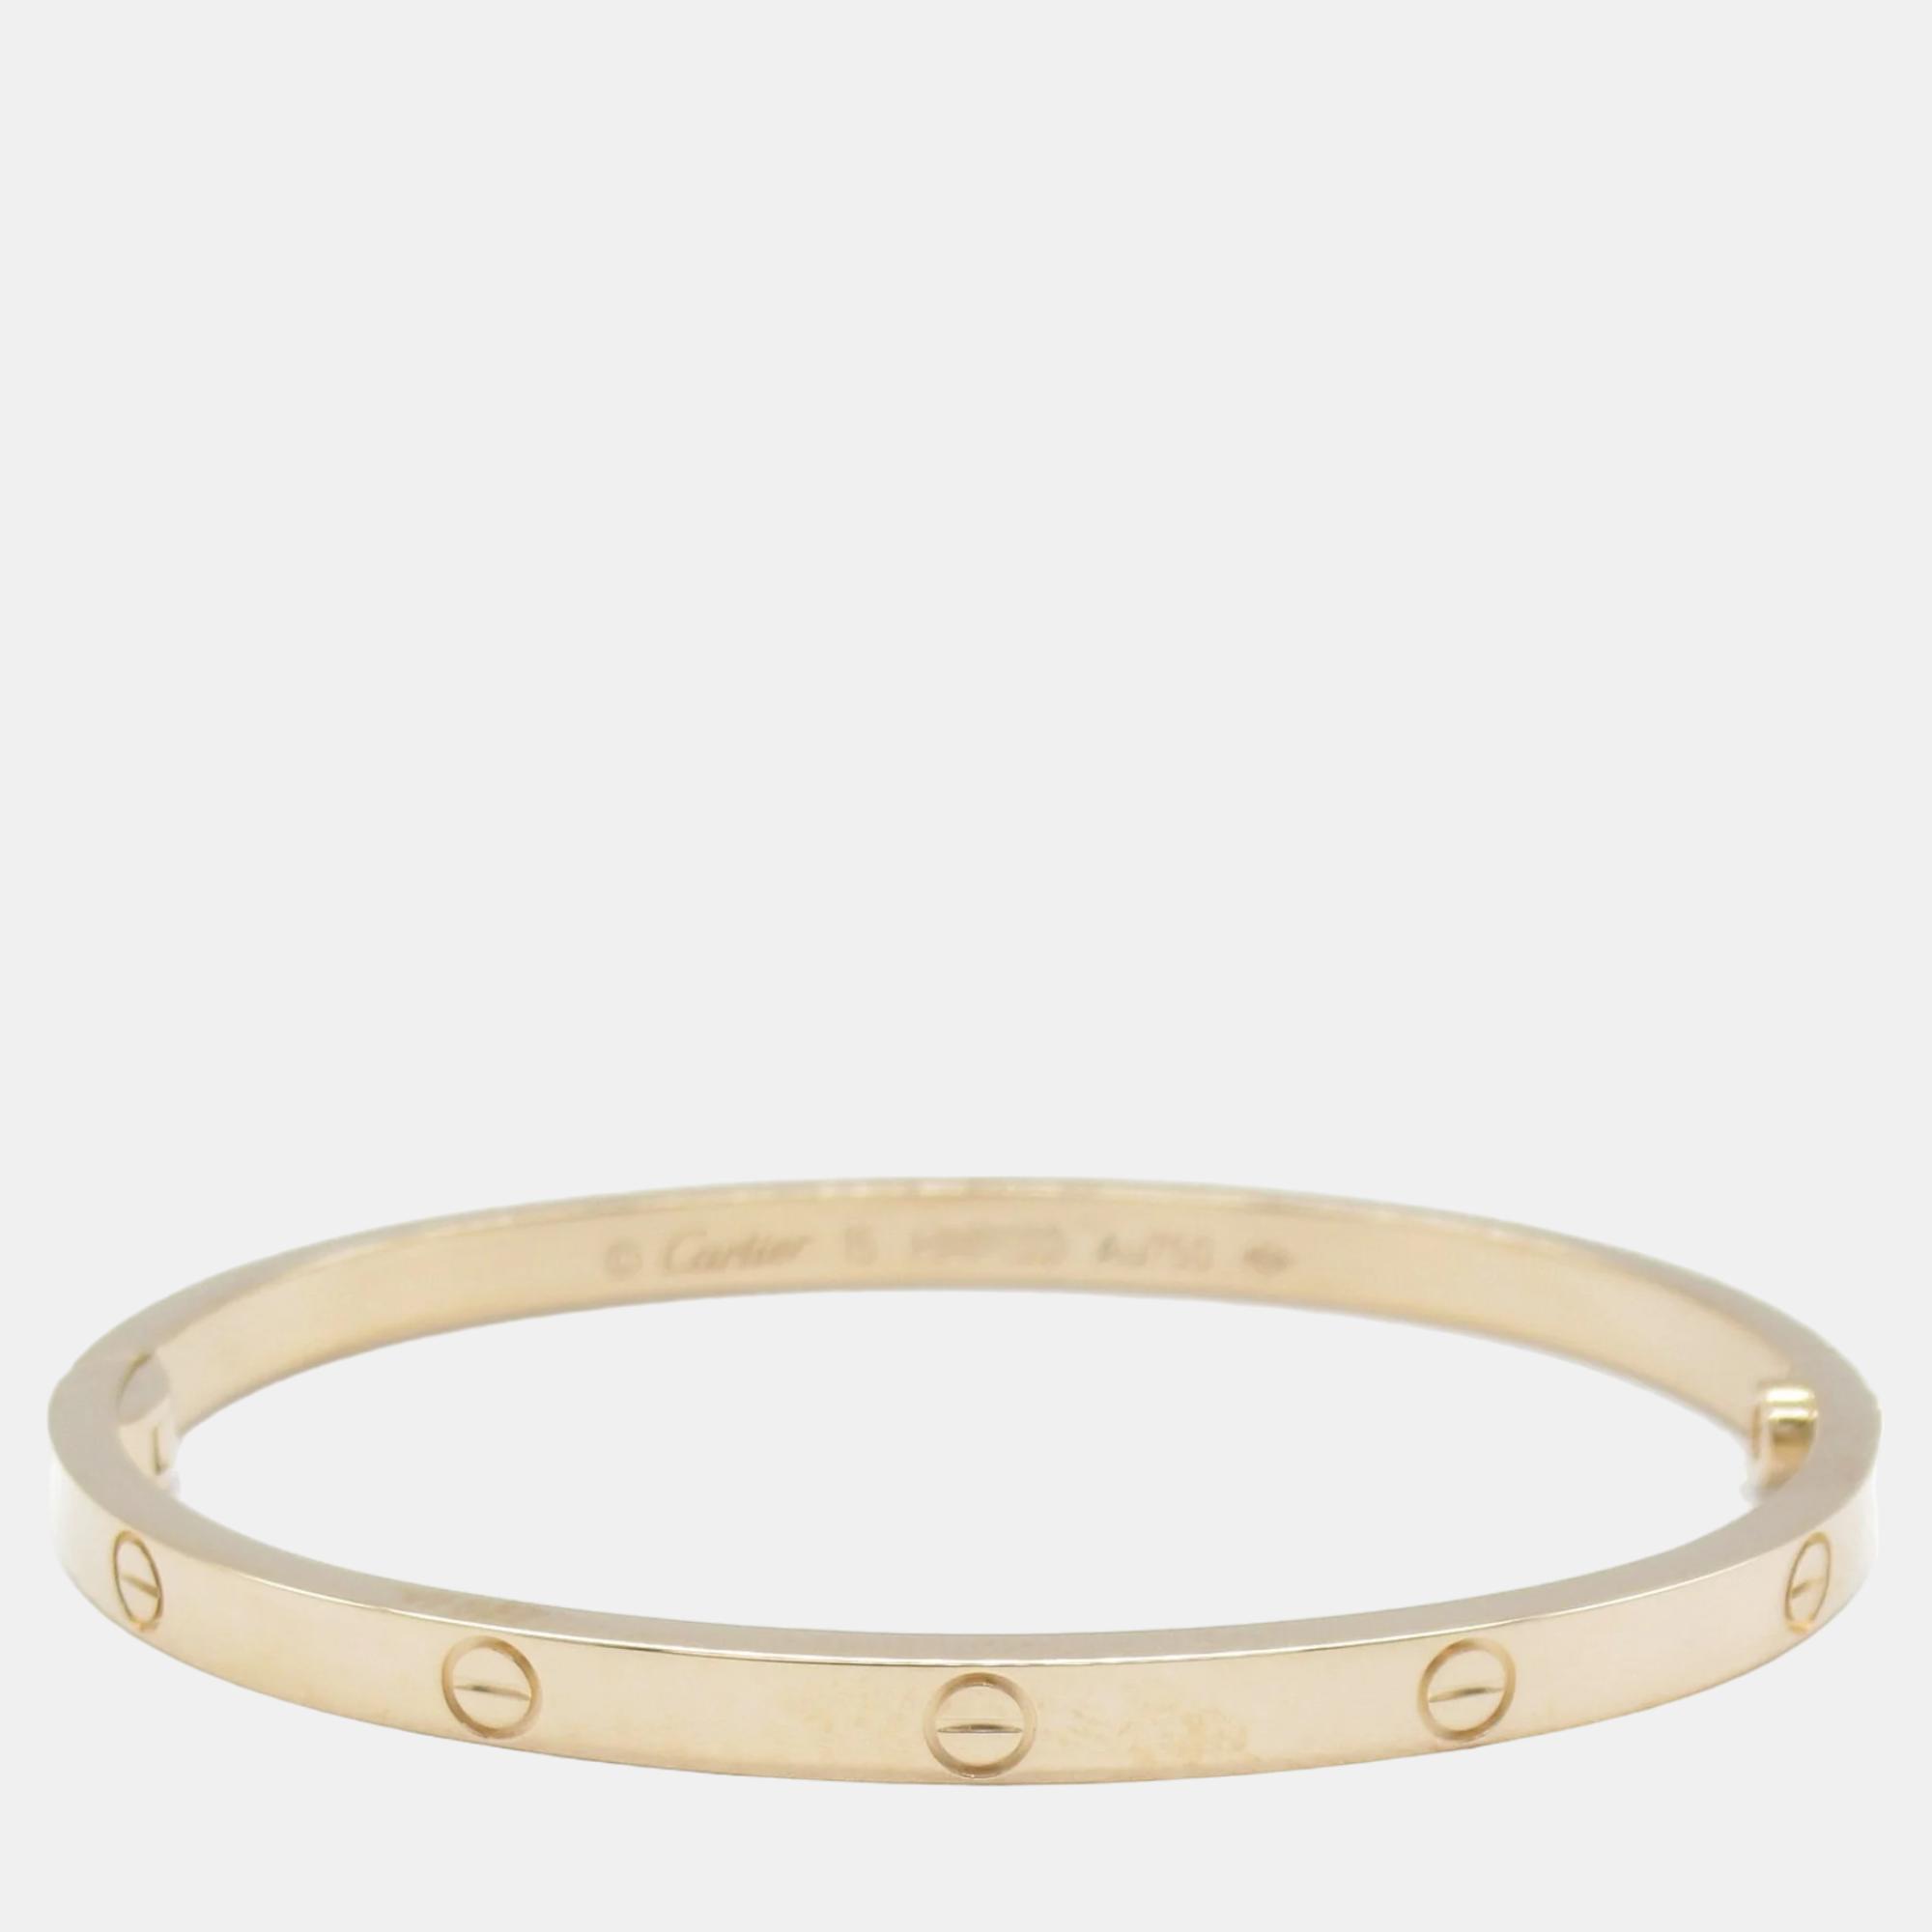 Cartiers Love bracelet is a modern symbol of luxury and a way to lock in ones love. Designed in an oval shape to comfortably sit around your wrist the iconic love handcuff is laid with distinct motifs and secured by screw closure.